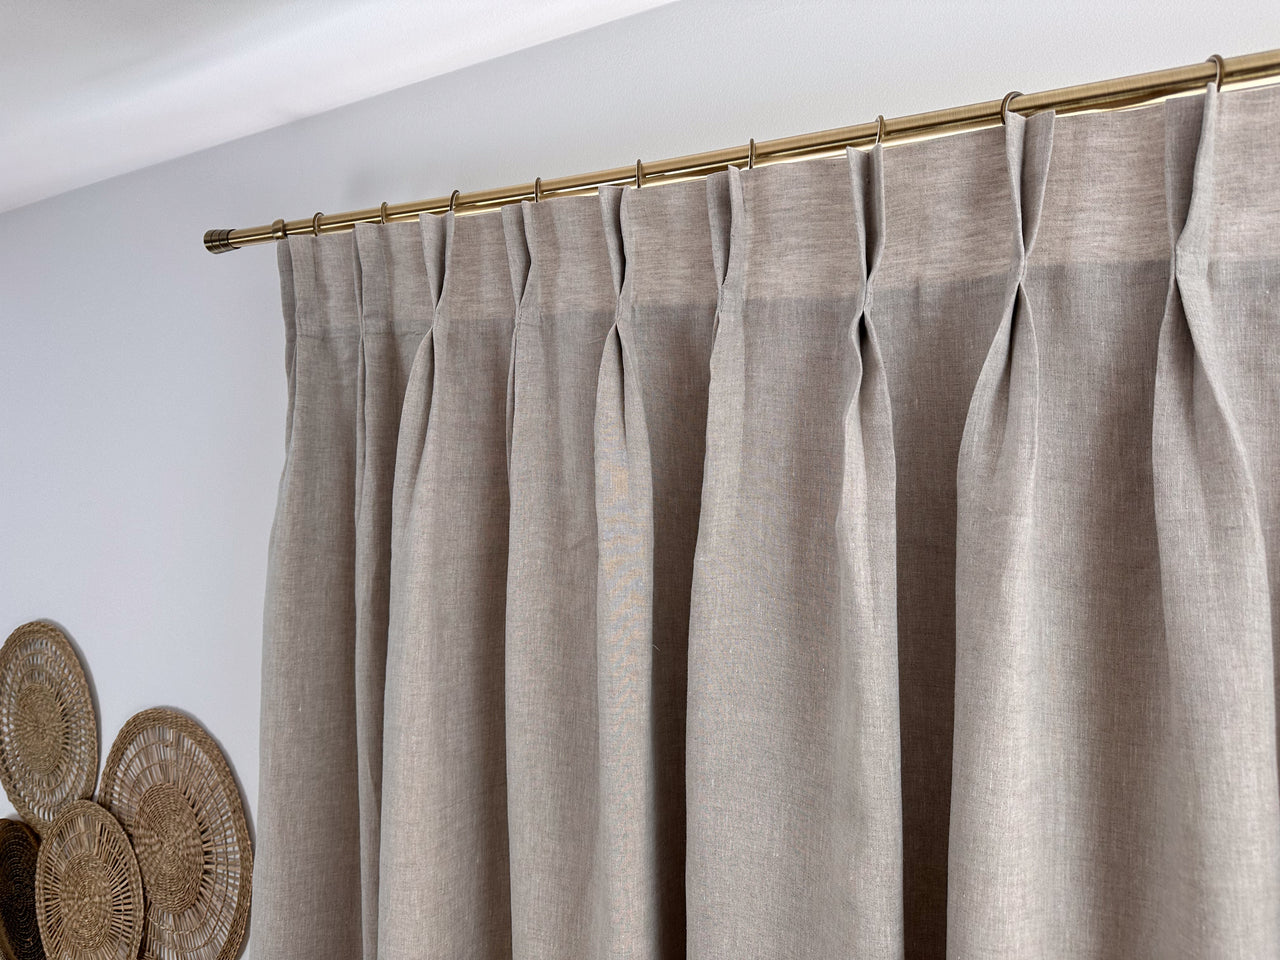 Doube Pinch Pleat Pleat Linen Curtain Panel for Living Room - Heading for Rings and Hooks